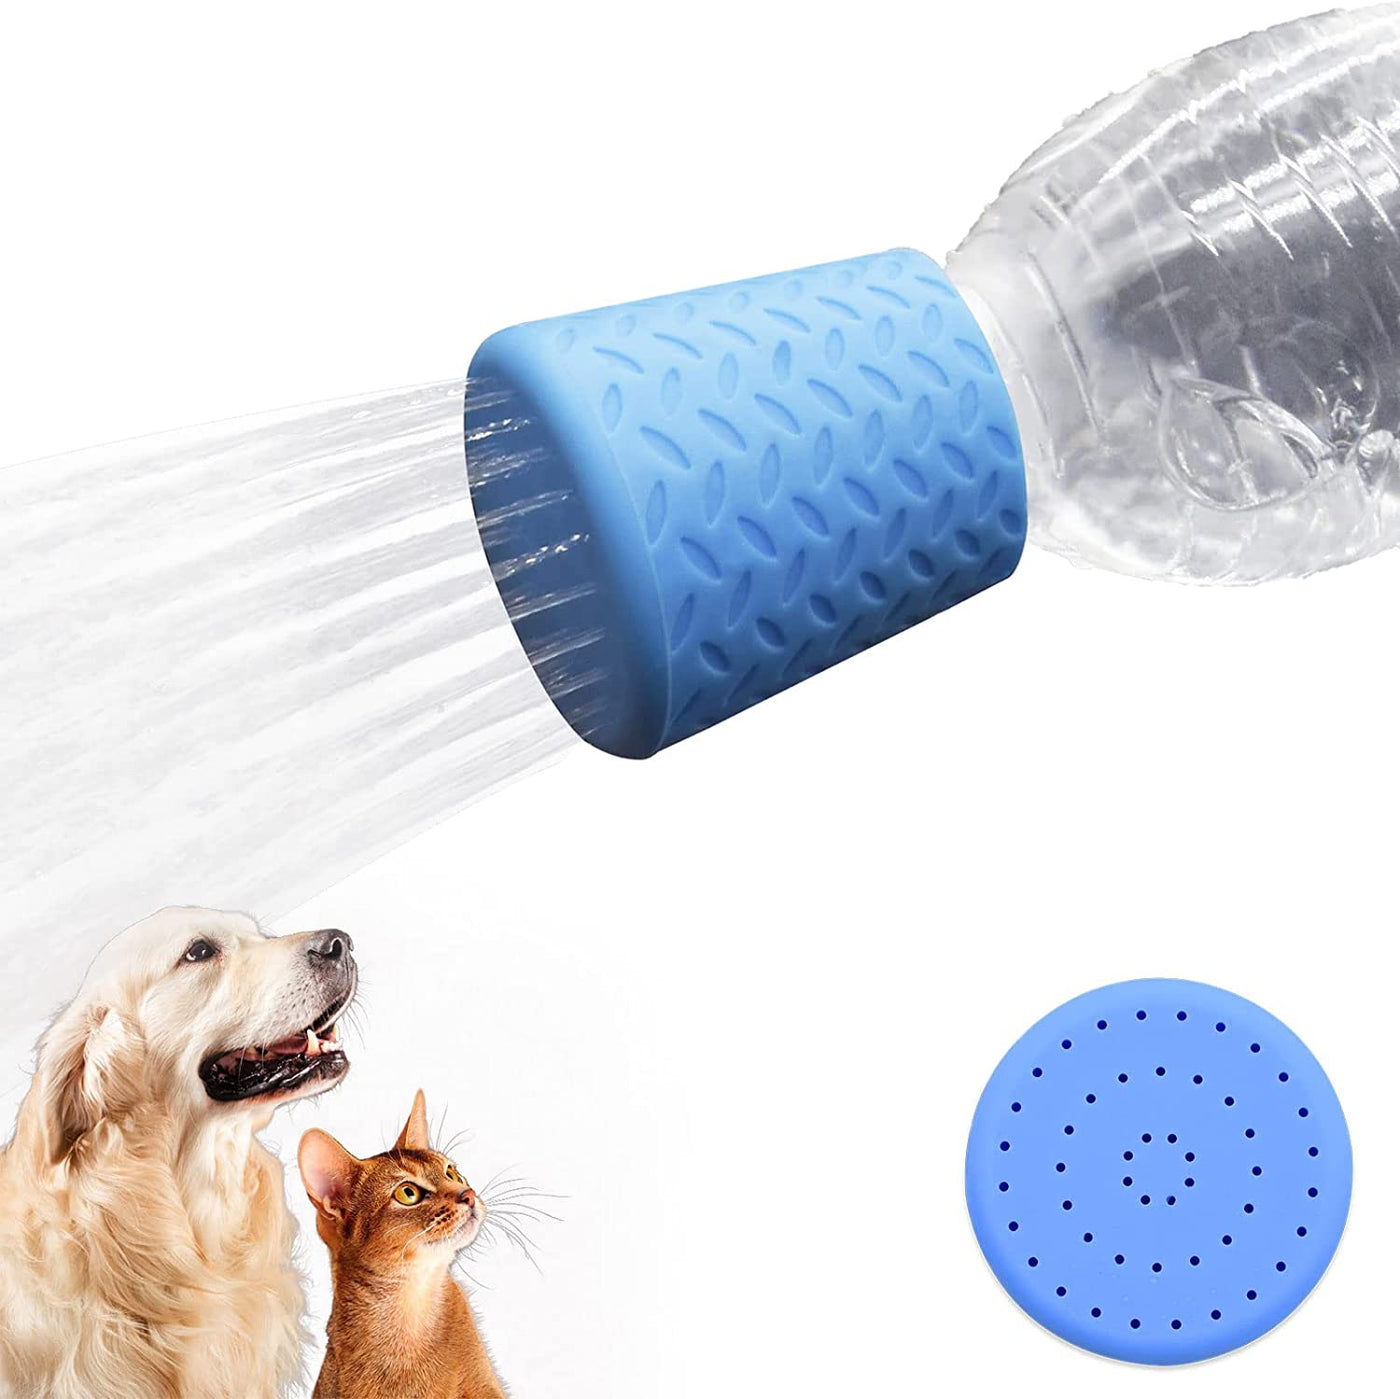  Silicone Dogs Shower Sprayer Head Attachment - Pet Shower Cap Sprinkler | Portable Outdoor Shower Heads for Camping, Hiking, Beach - Fits Most Plastic Mineral Water Bottle, 1 Pack Green